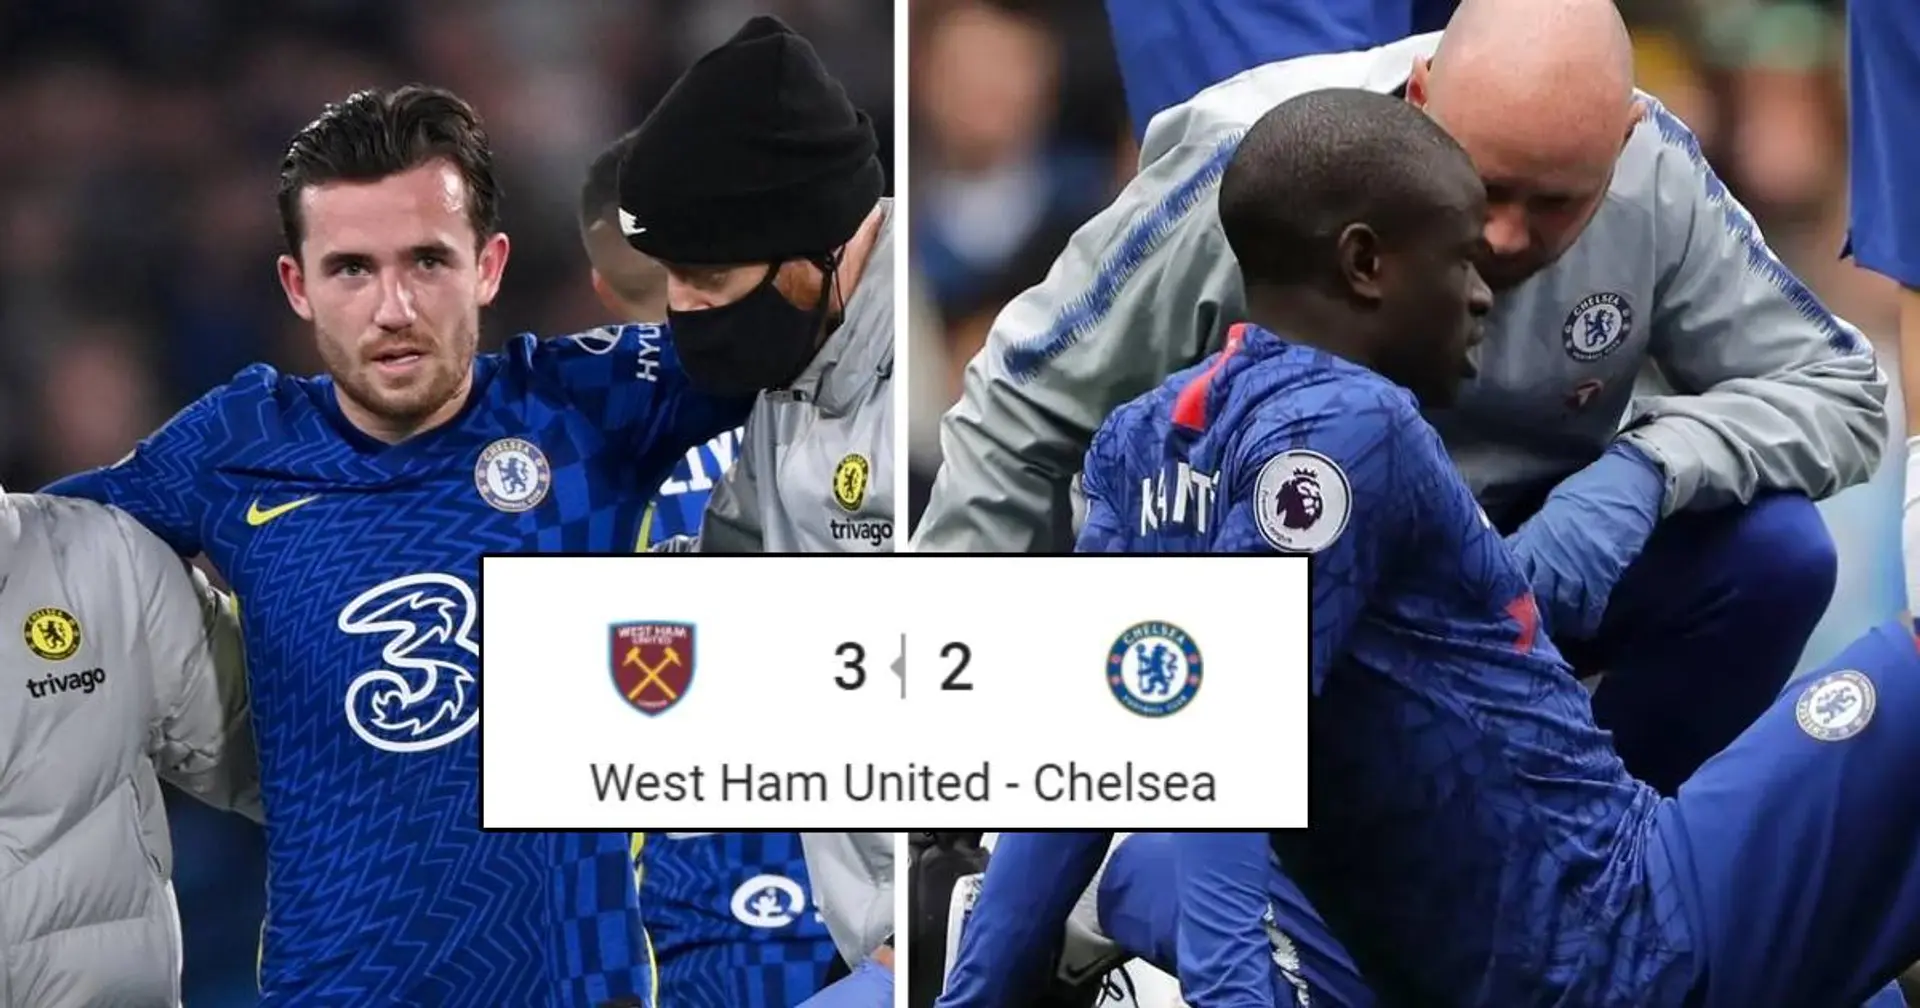 How much have Chelsea suffered without Kante and Chilwell? Highlighting poor form in duo's absence